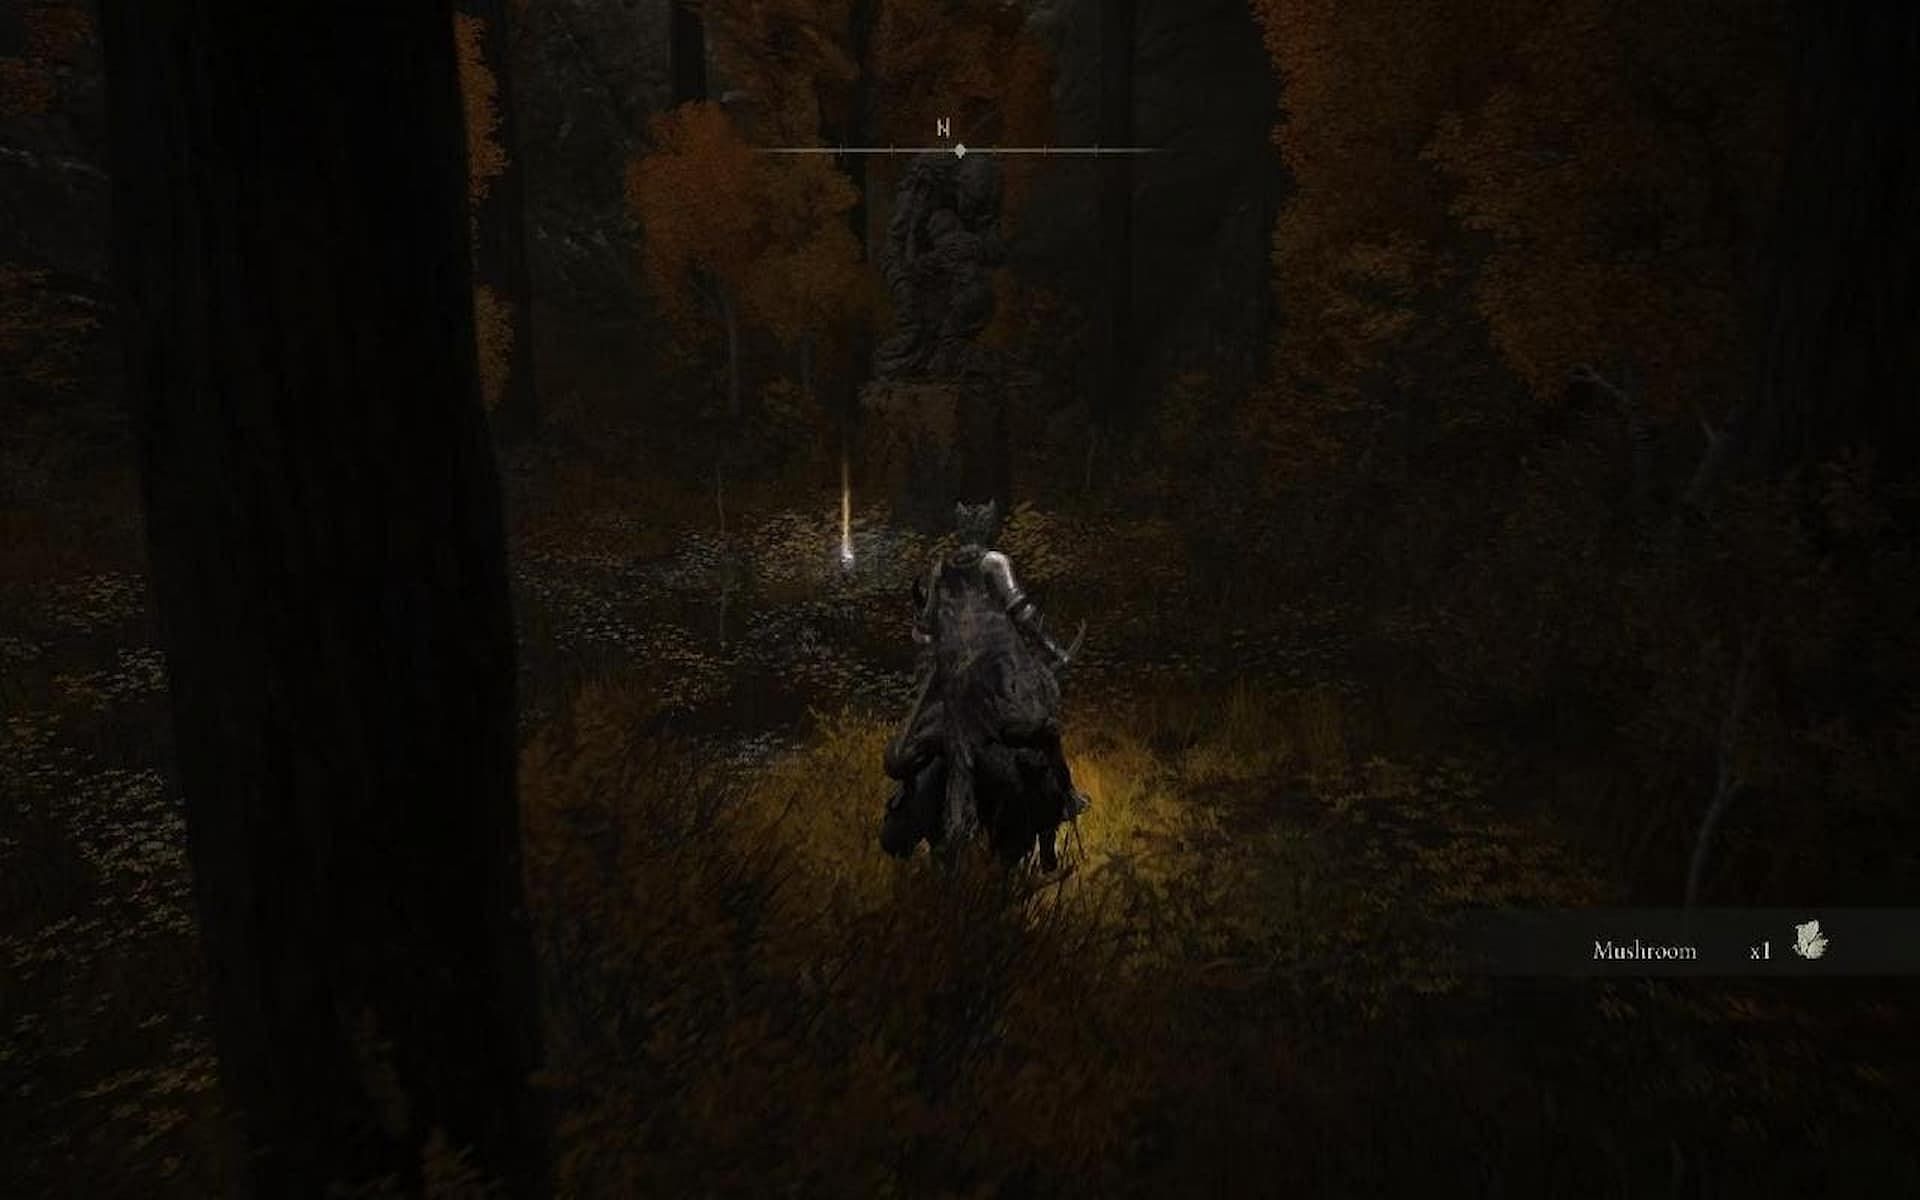 A player searches for Amber Starlight in the Altus Plateau region of Elden Ring (Image via FromSoftware Inc.)